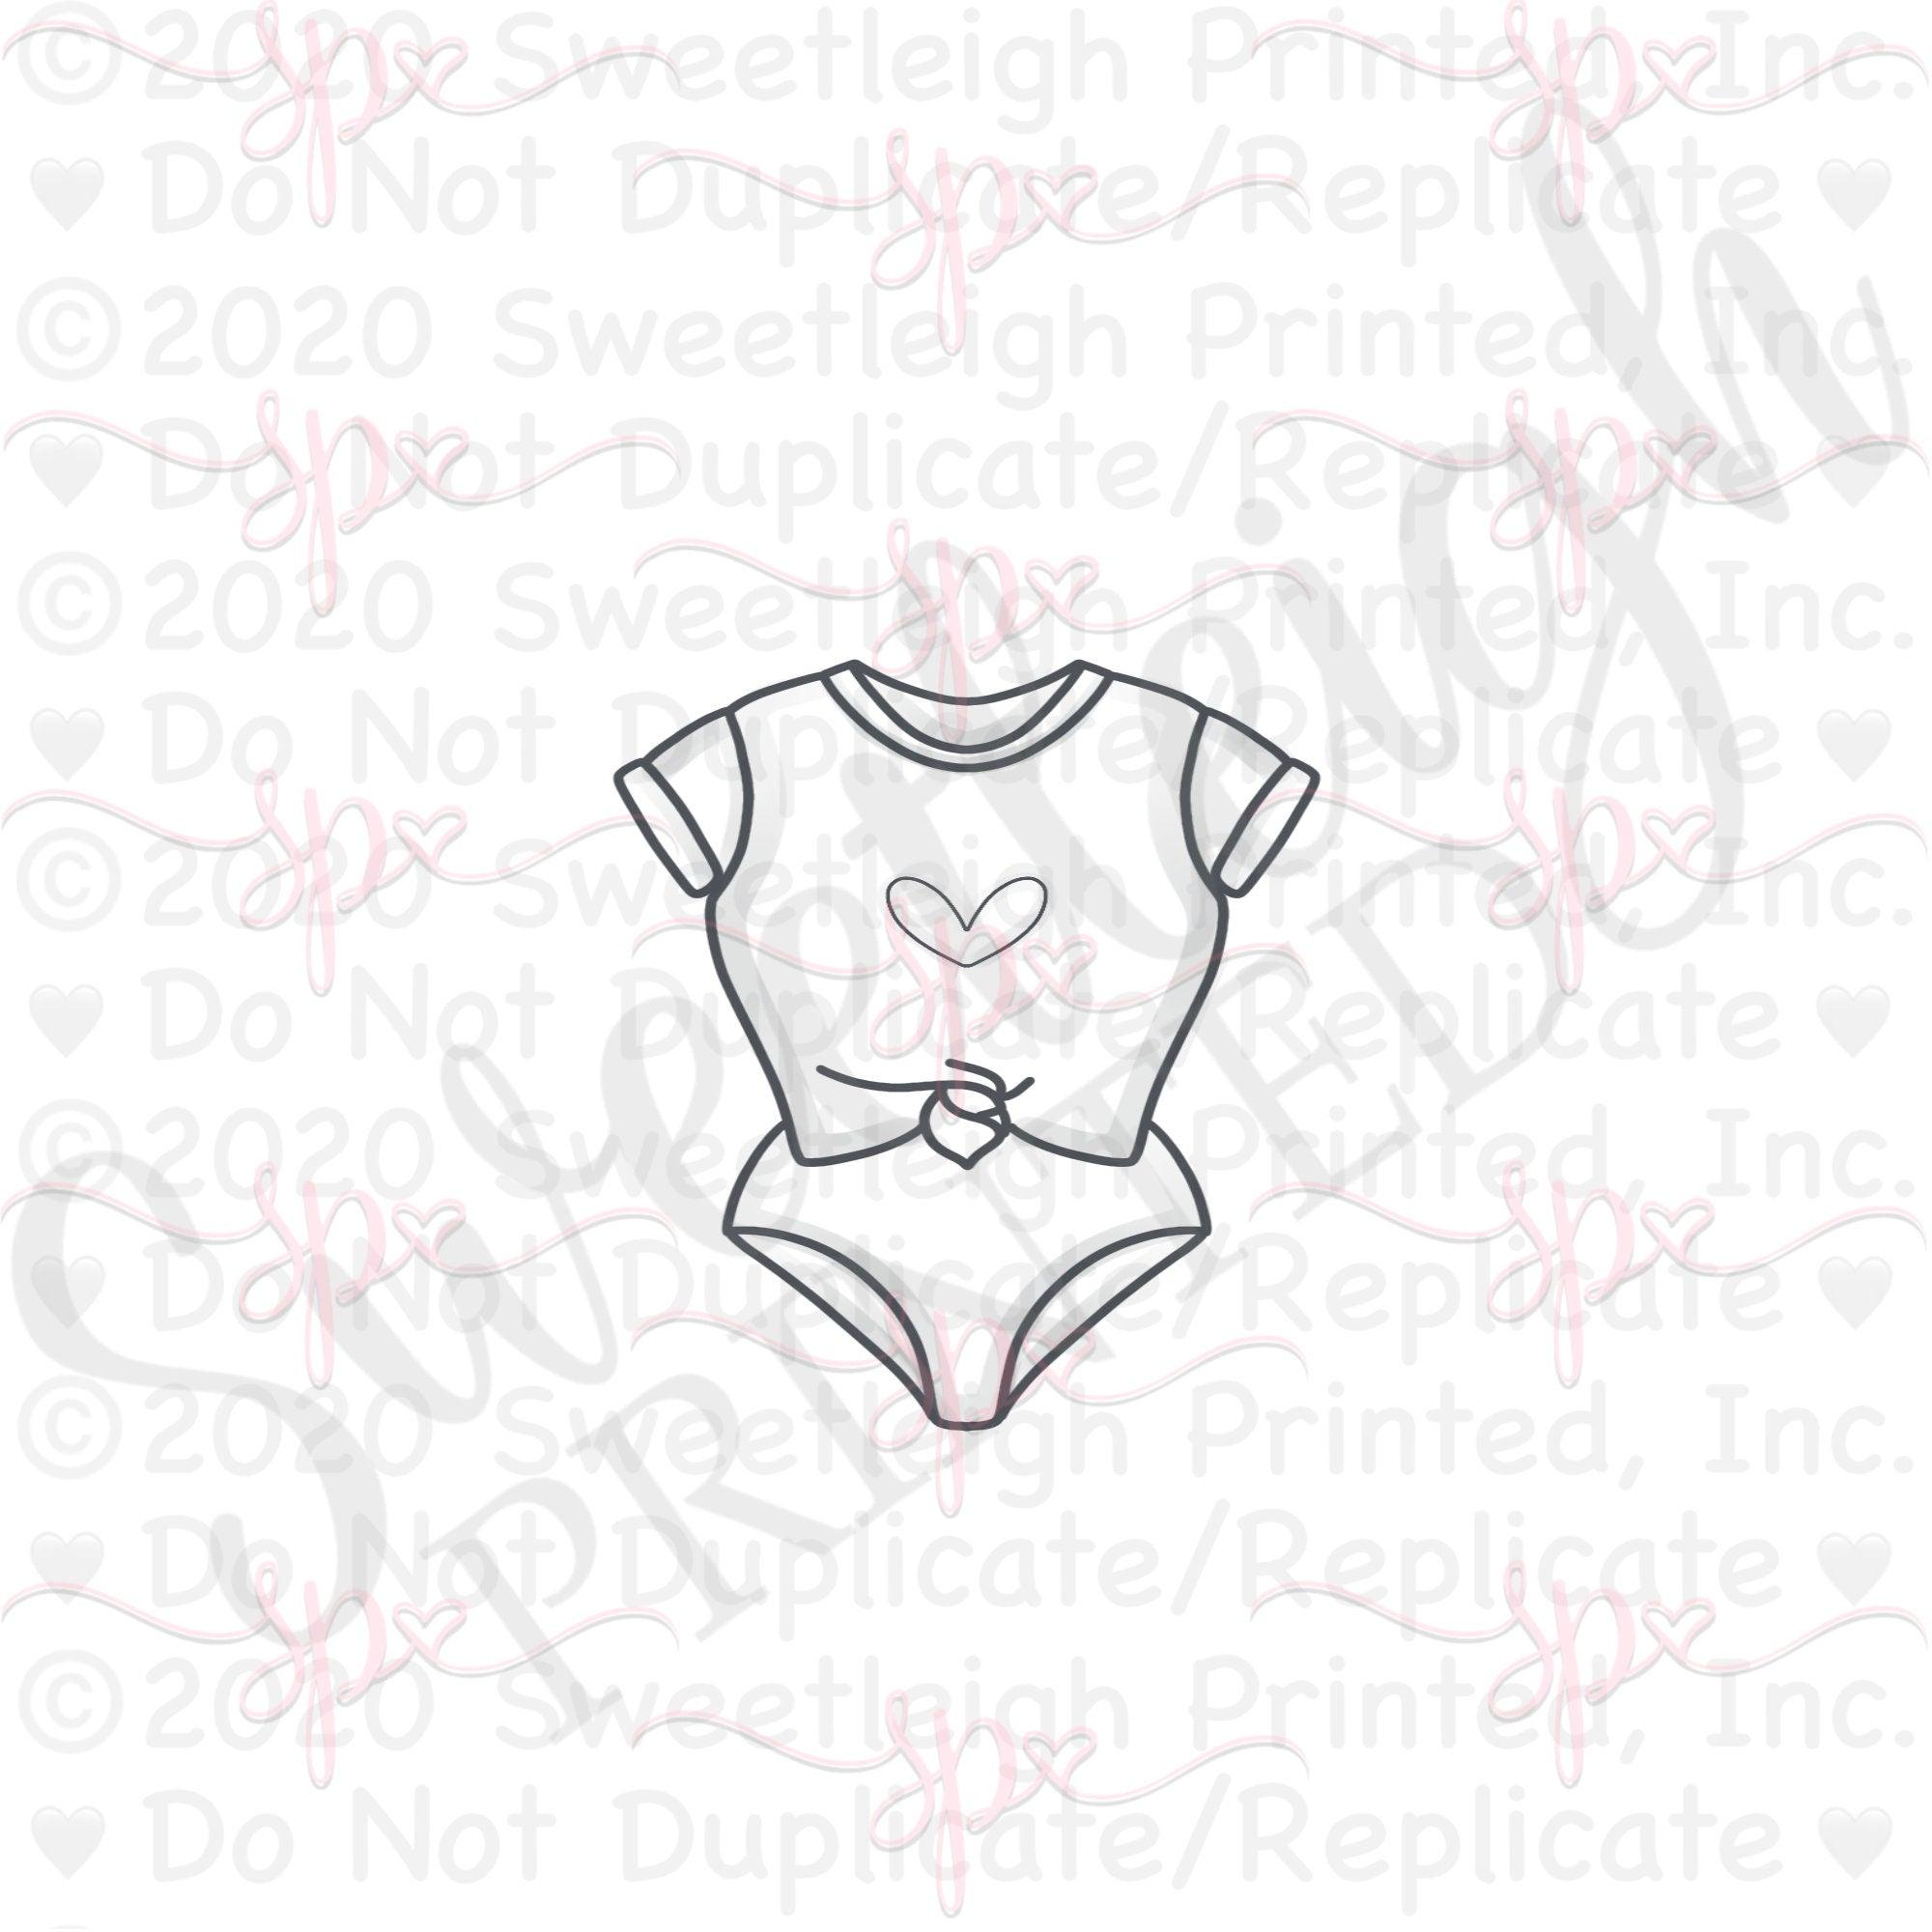 Full Knotted Tee Bathing Suit Cookie Cutter - Sweetleigh 